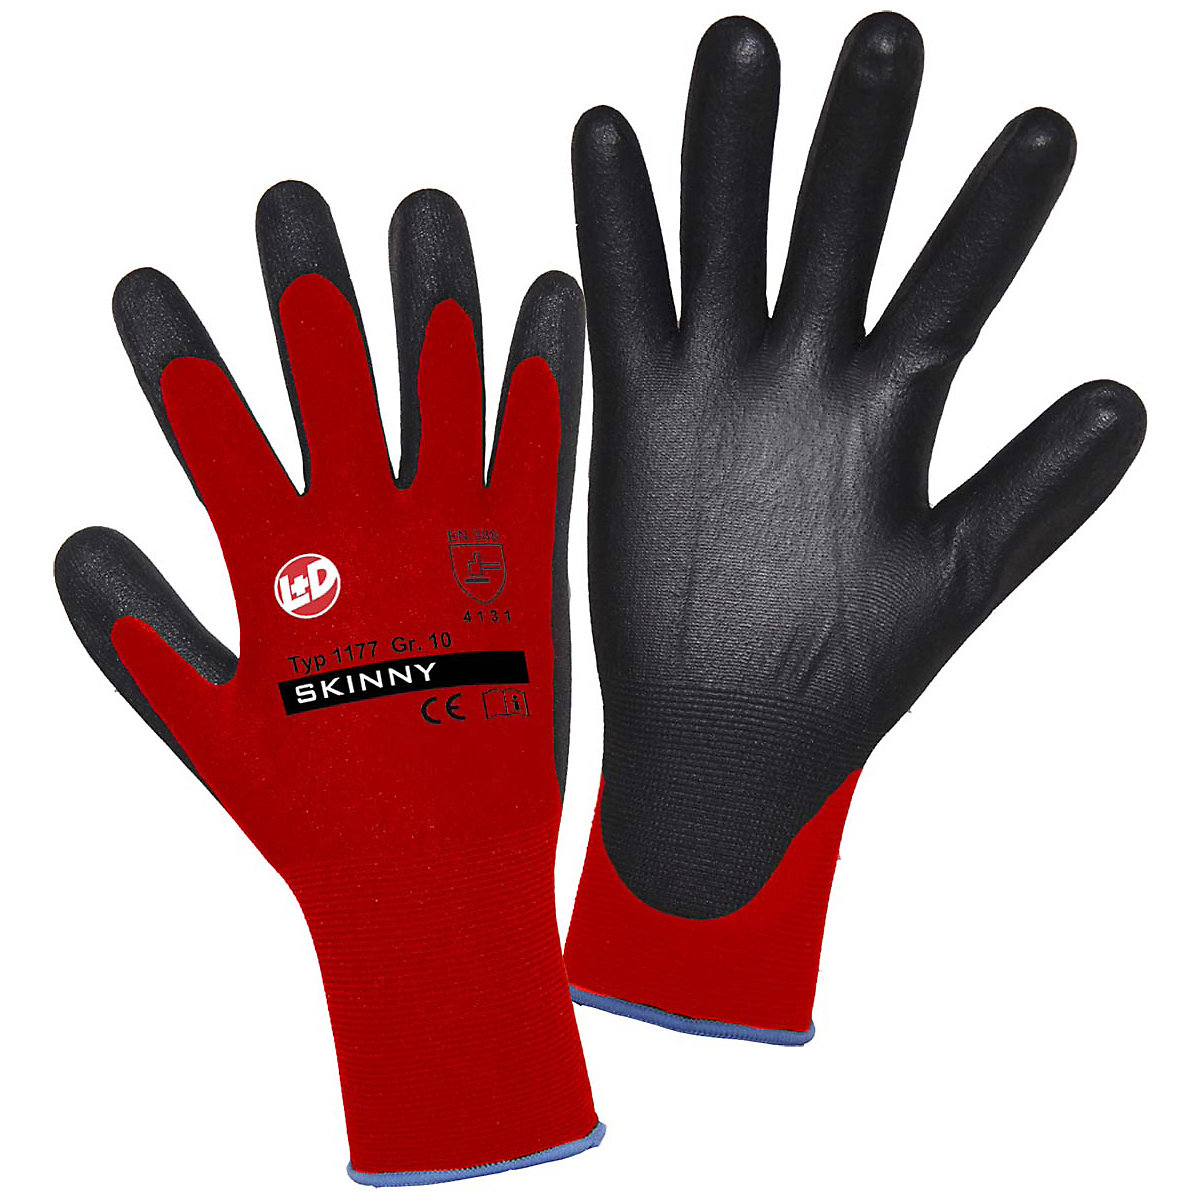 Gants alimentaires anti coupures Ansell HyFlex® 72-400